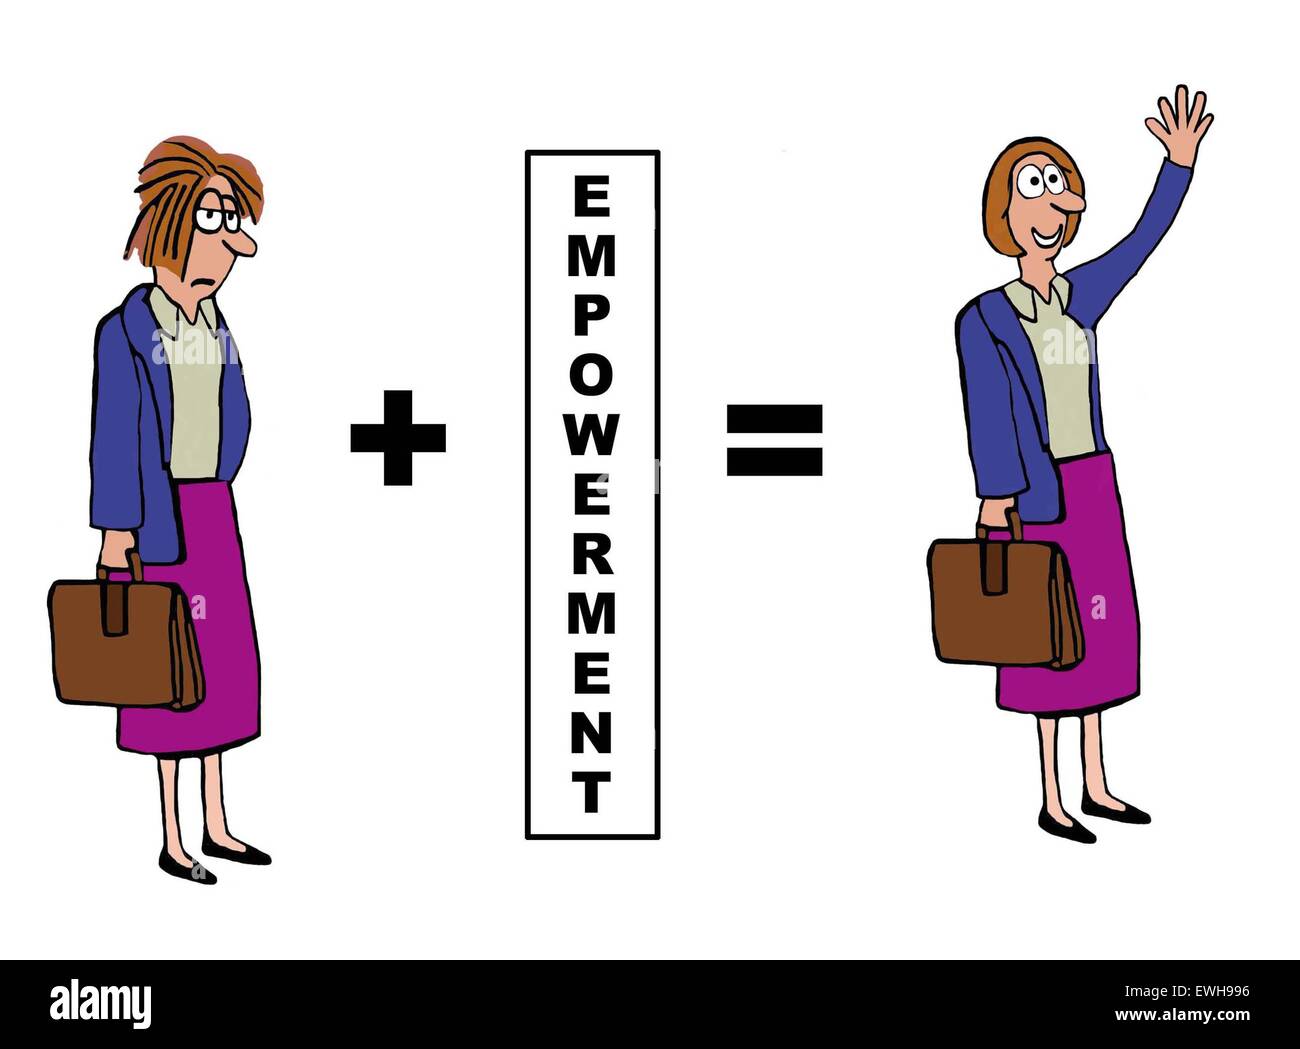 Business cartoon showing the positive impact of 'empowerment' on the businesswoman. Stock Photo